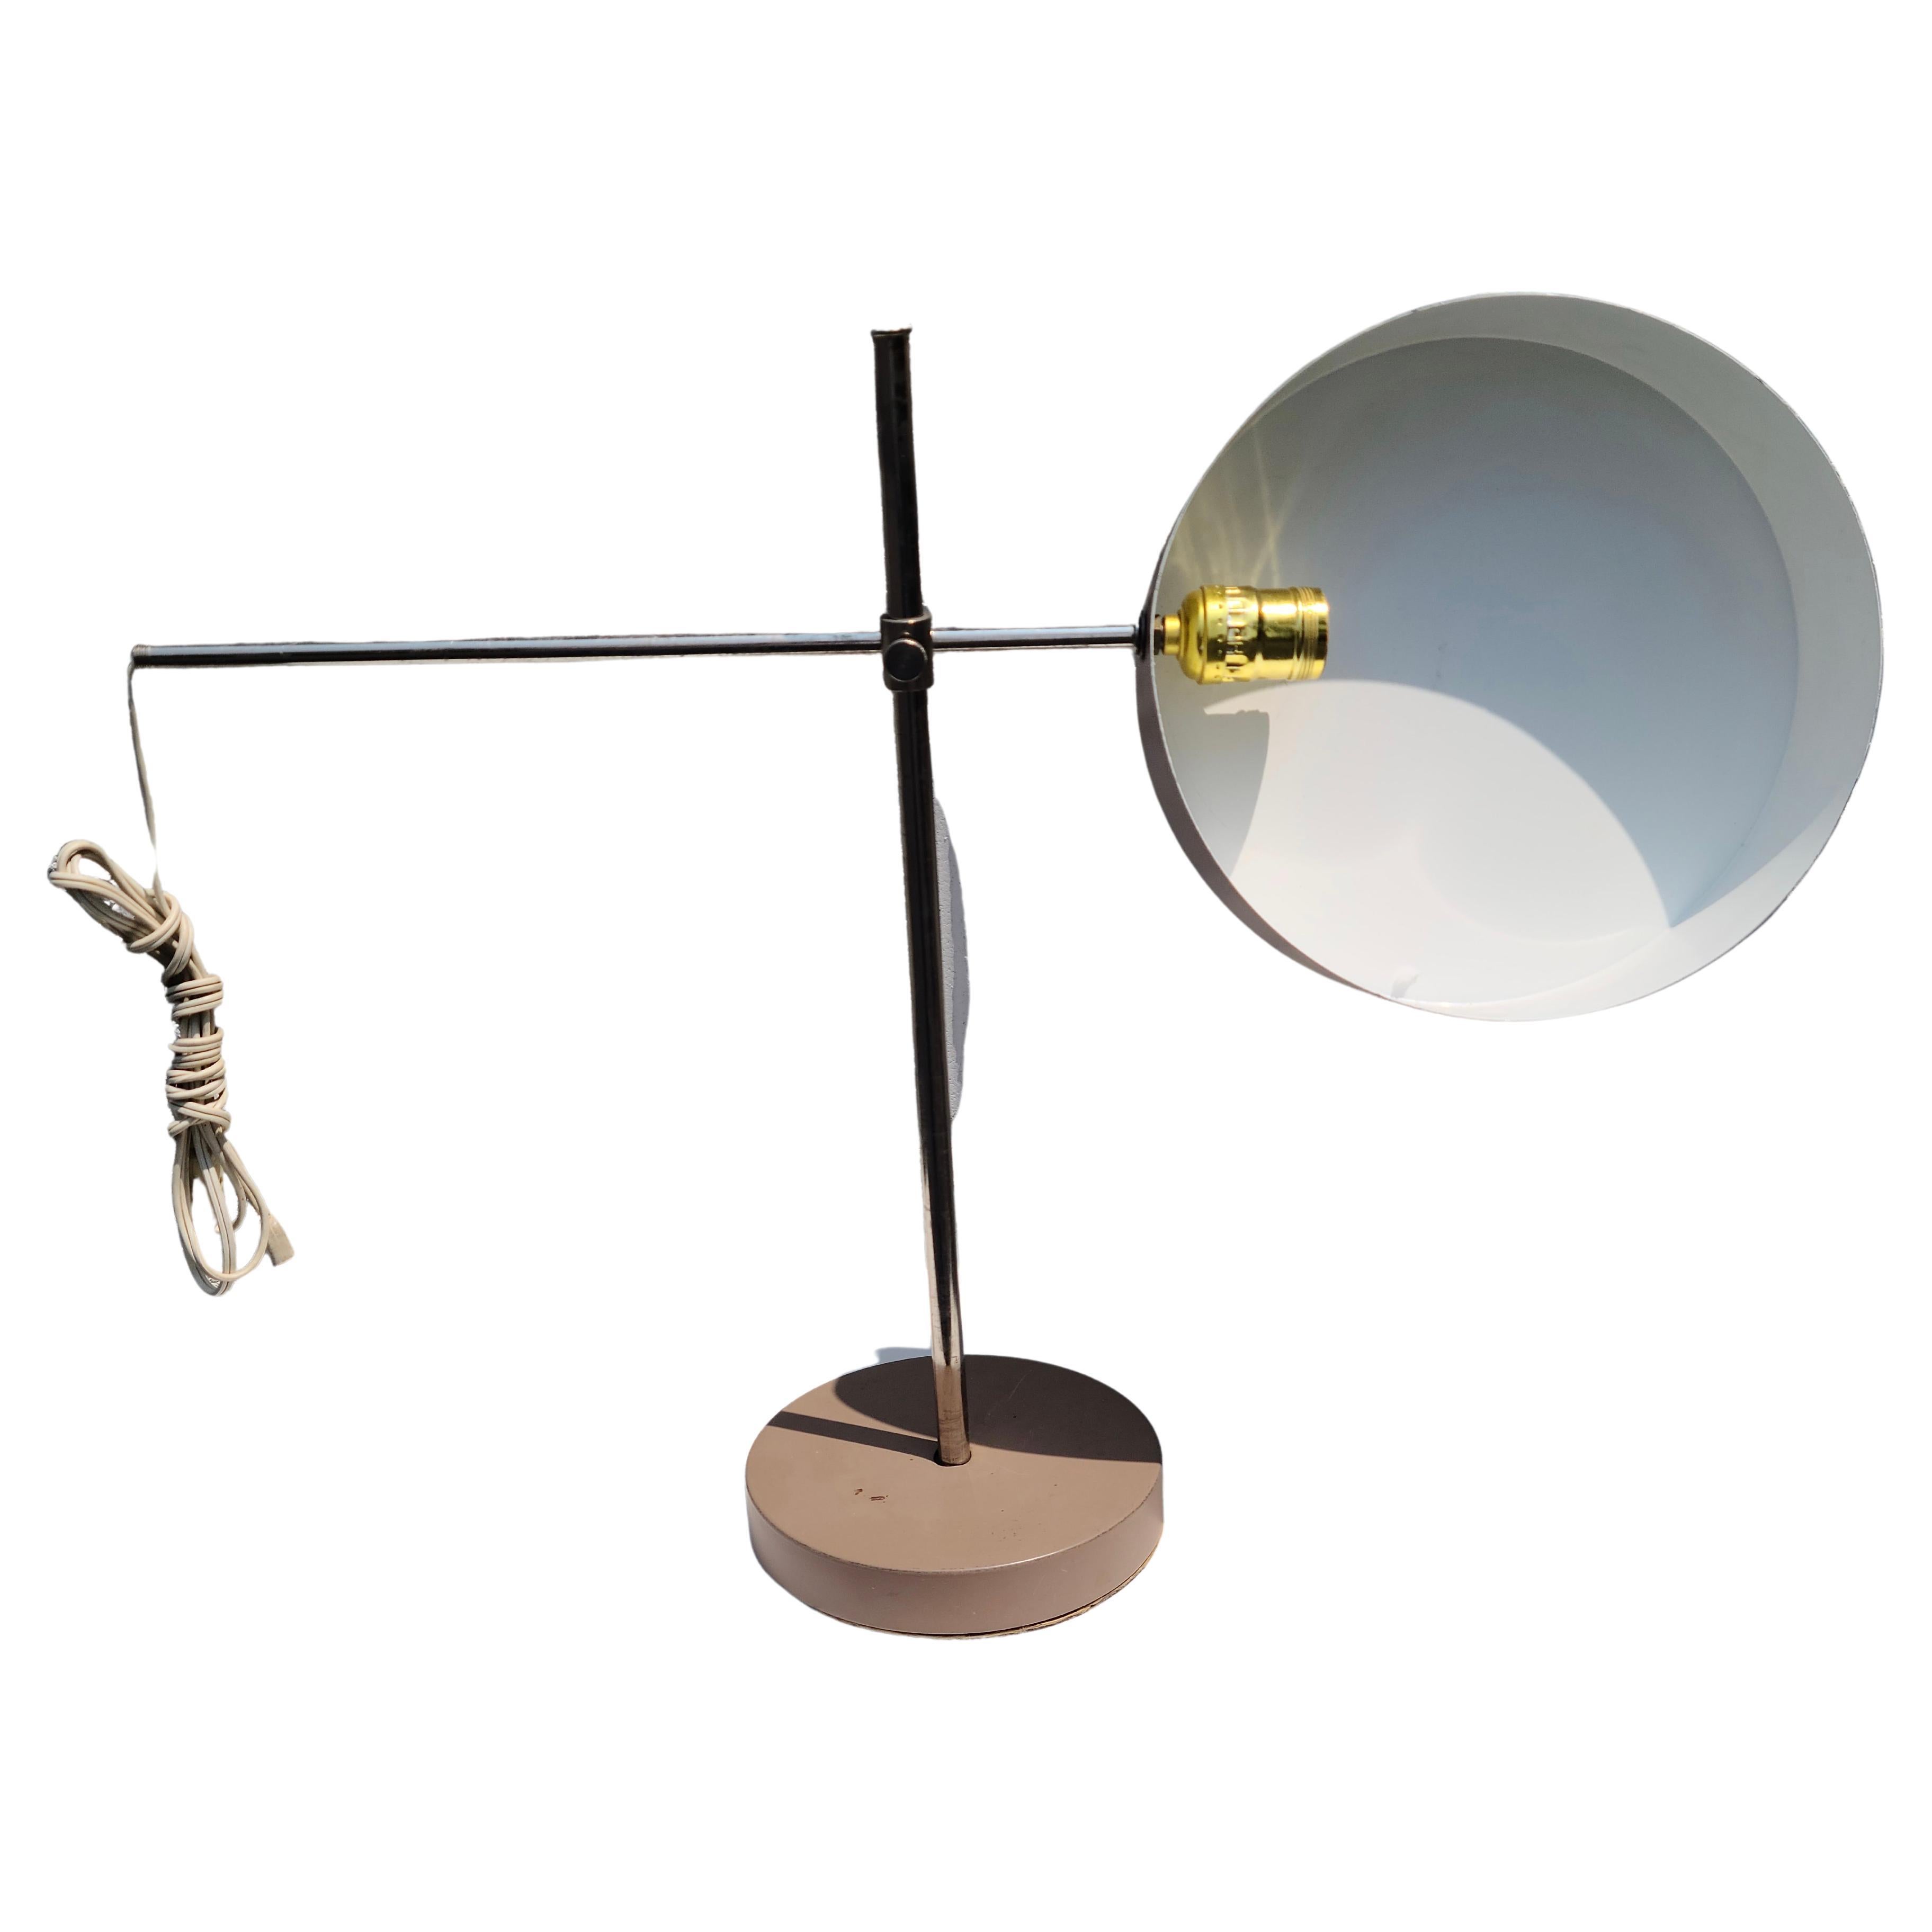 Adjustable Desk Lamp.
In the Style of Anders Pehrson of Atelier Lyktan.
This model is shown in the Cara Greenberg book on Mid Century Modern.